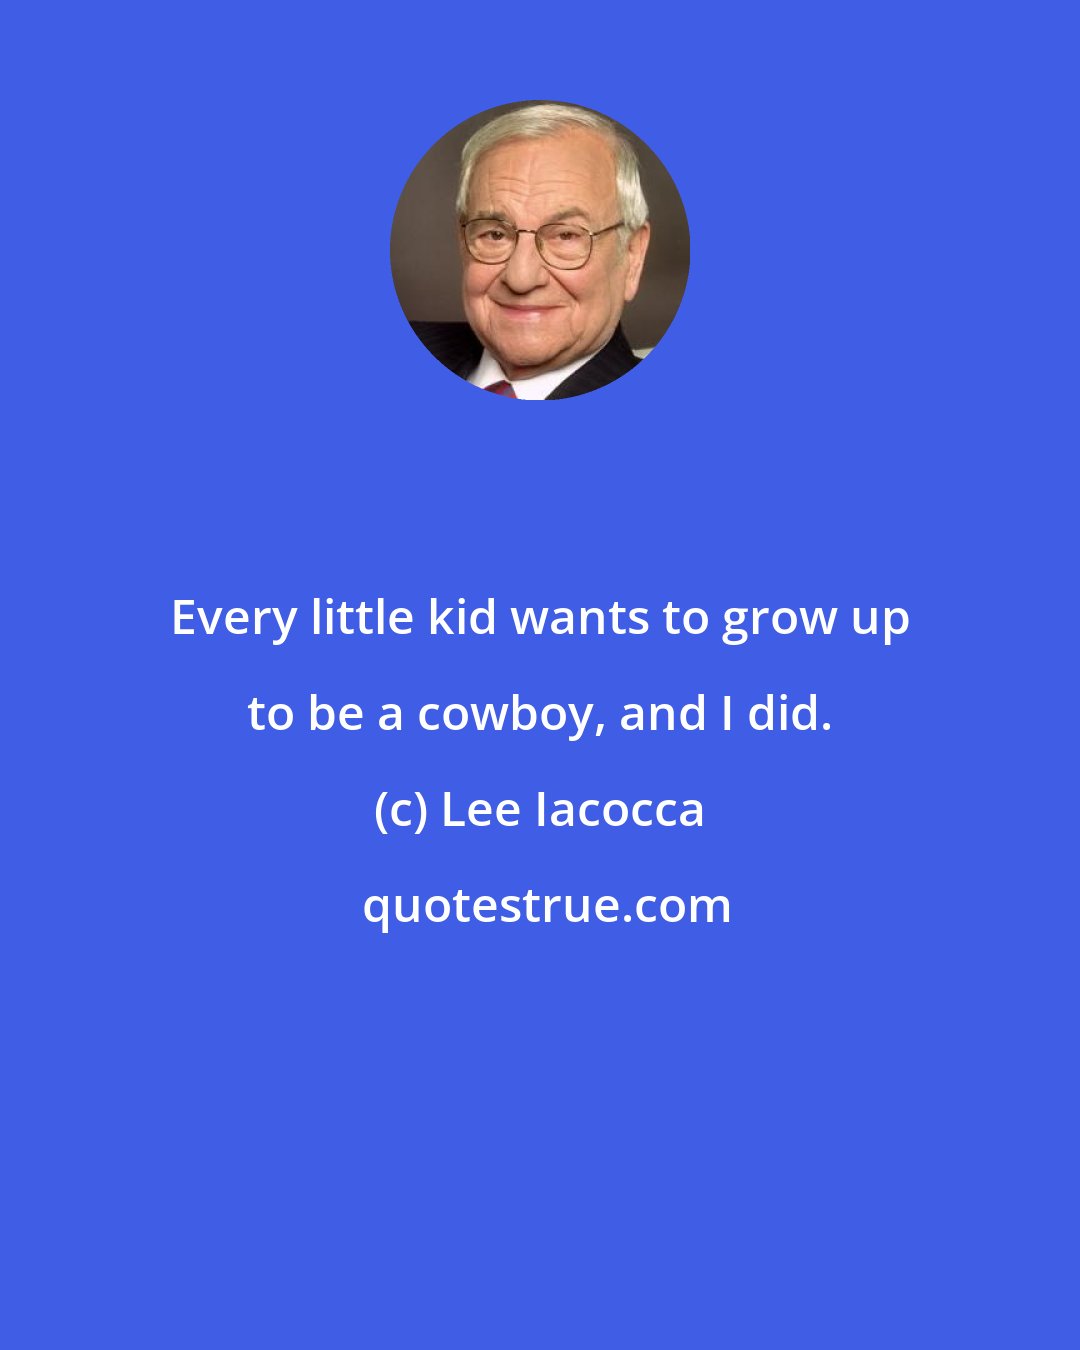 Lee Iacocca: Every little kid wants to grow up to be a cowboy, and I did.